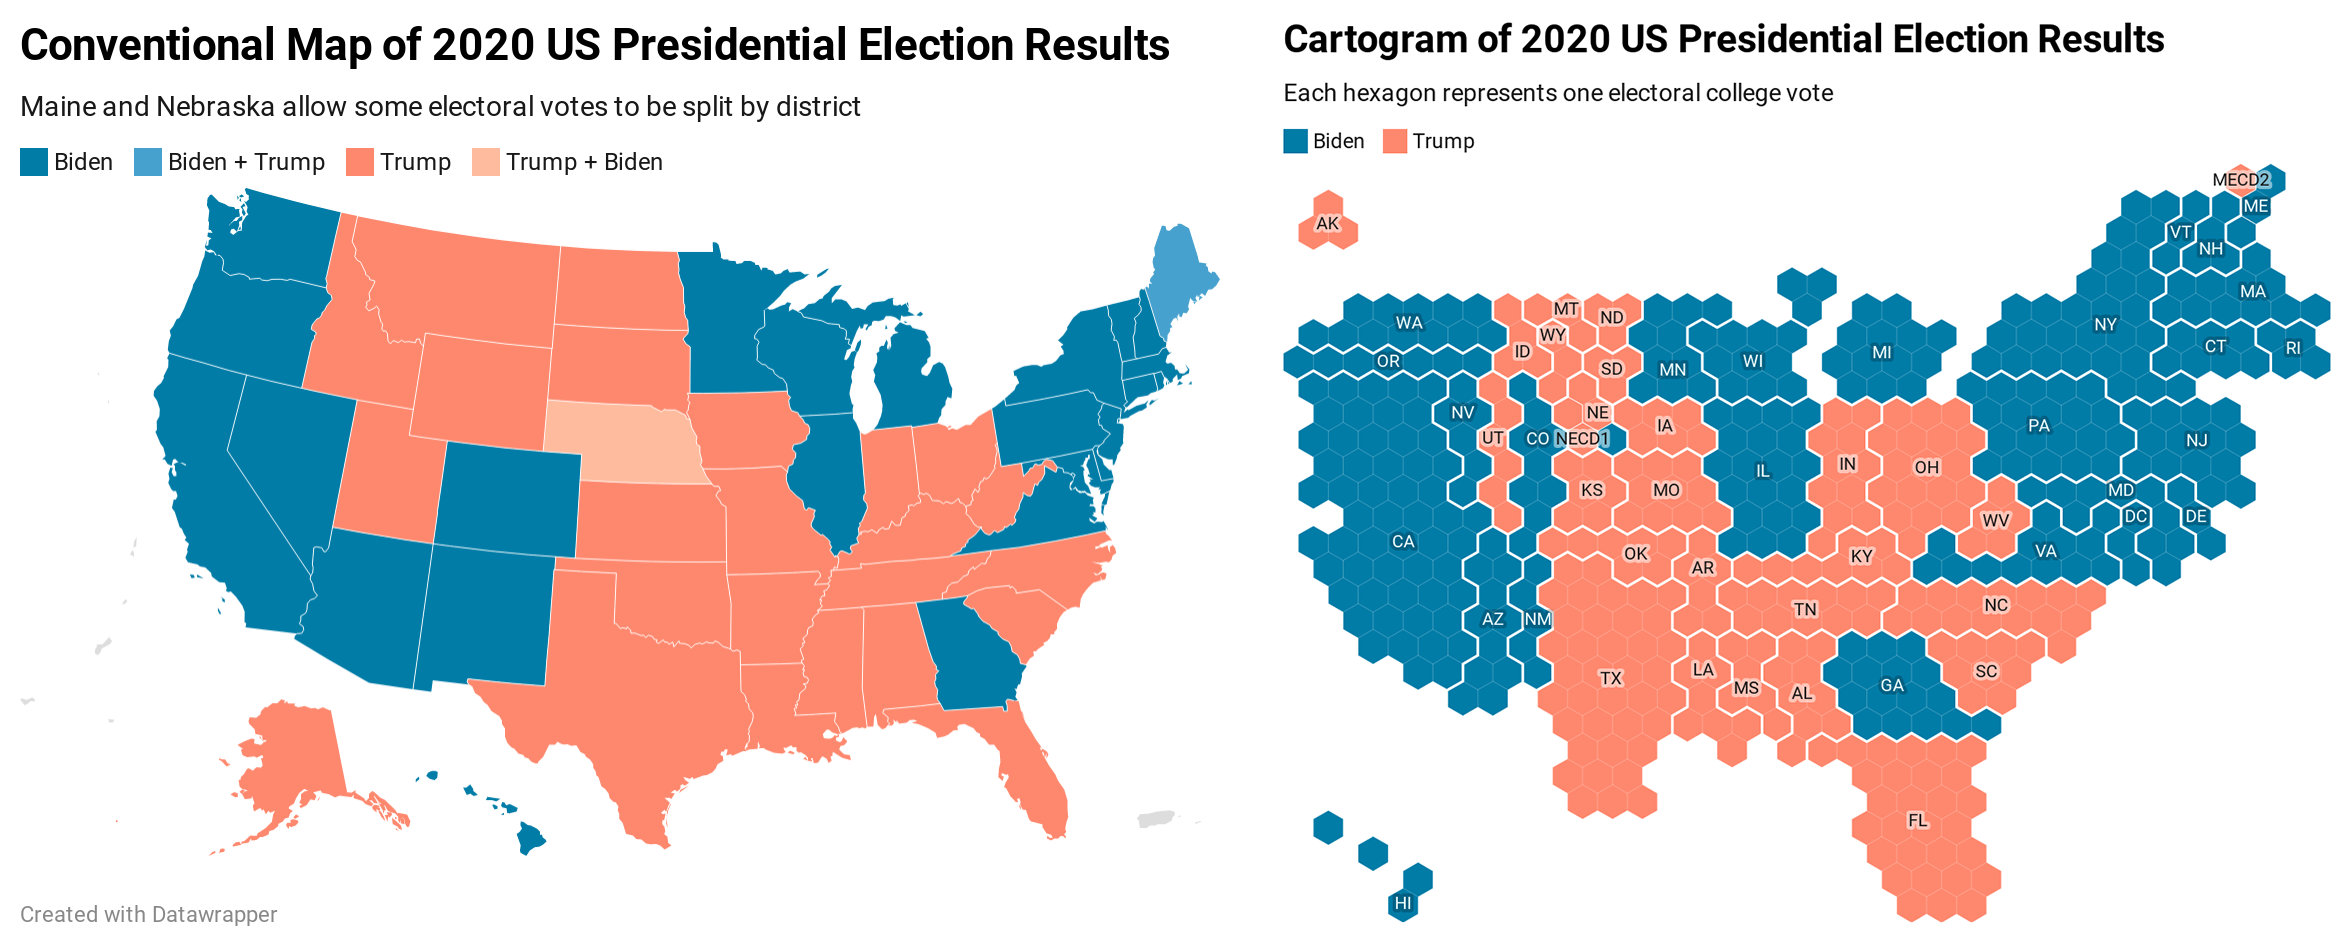 The US 2020 Presidential electoral vote displayed in a conventional US map (left) versus a cartogram (right), both created with Datawrapper.